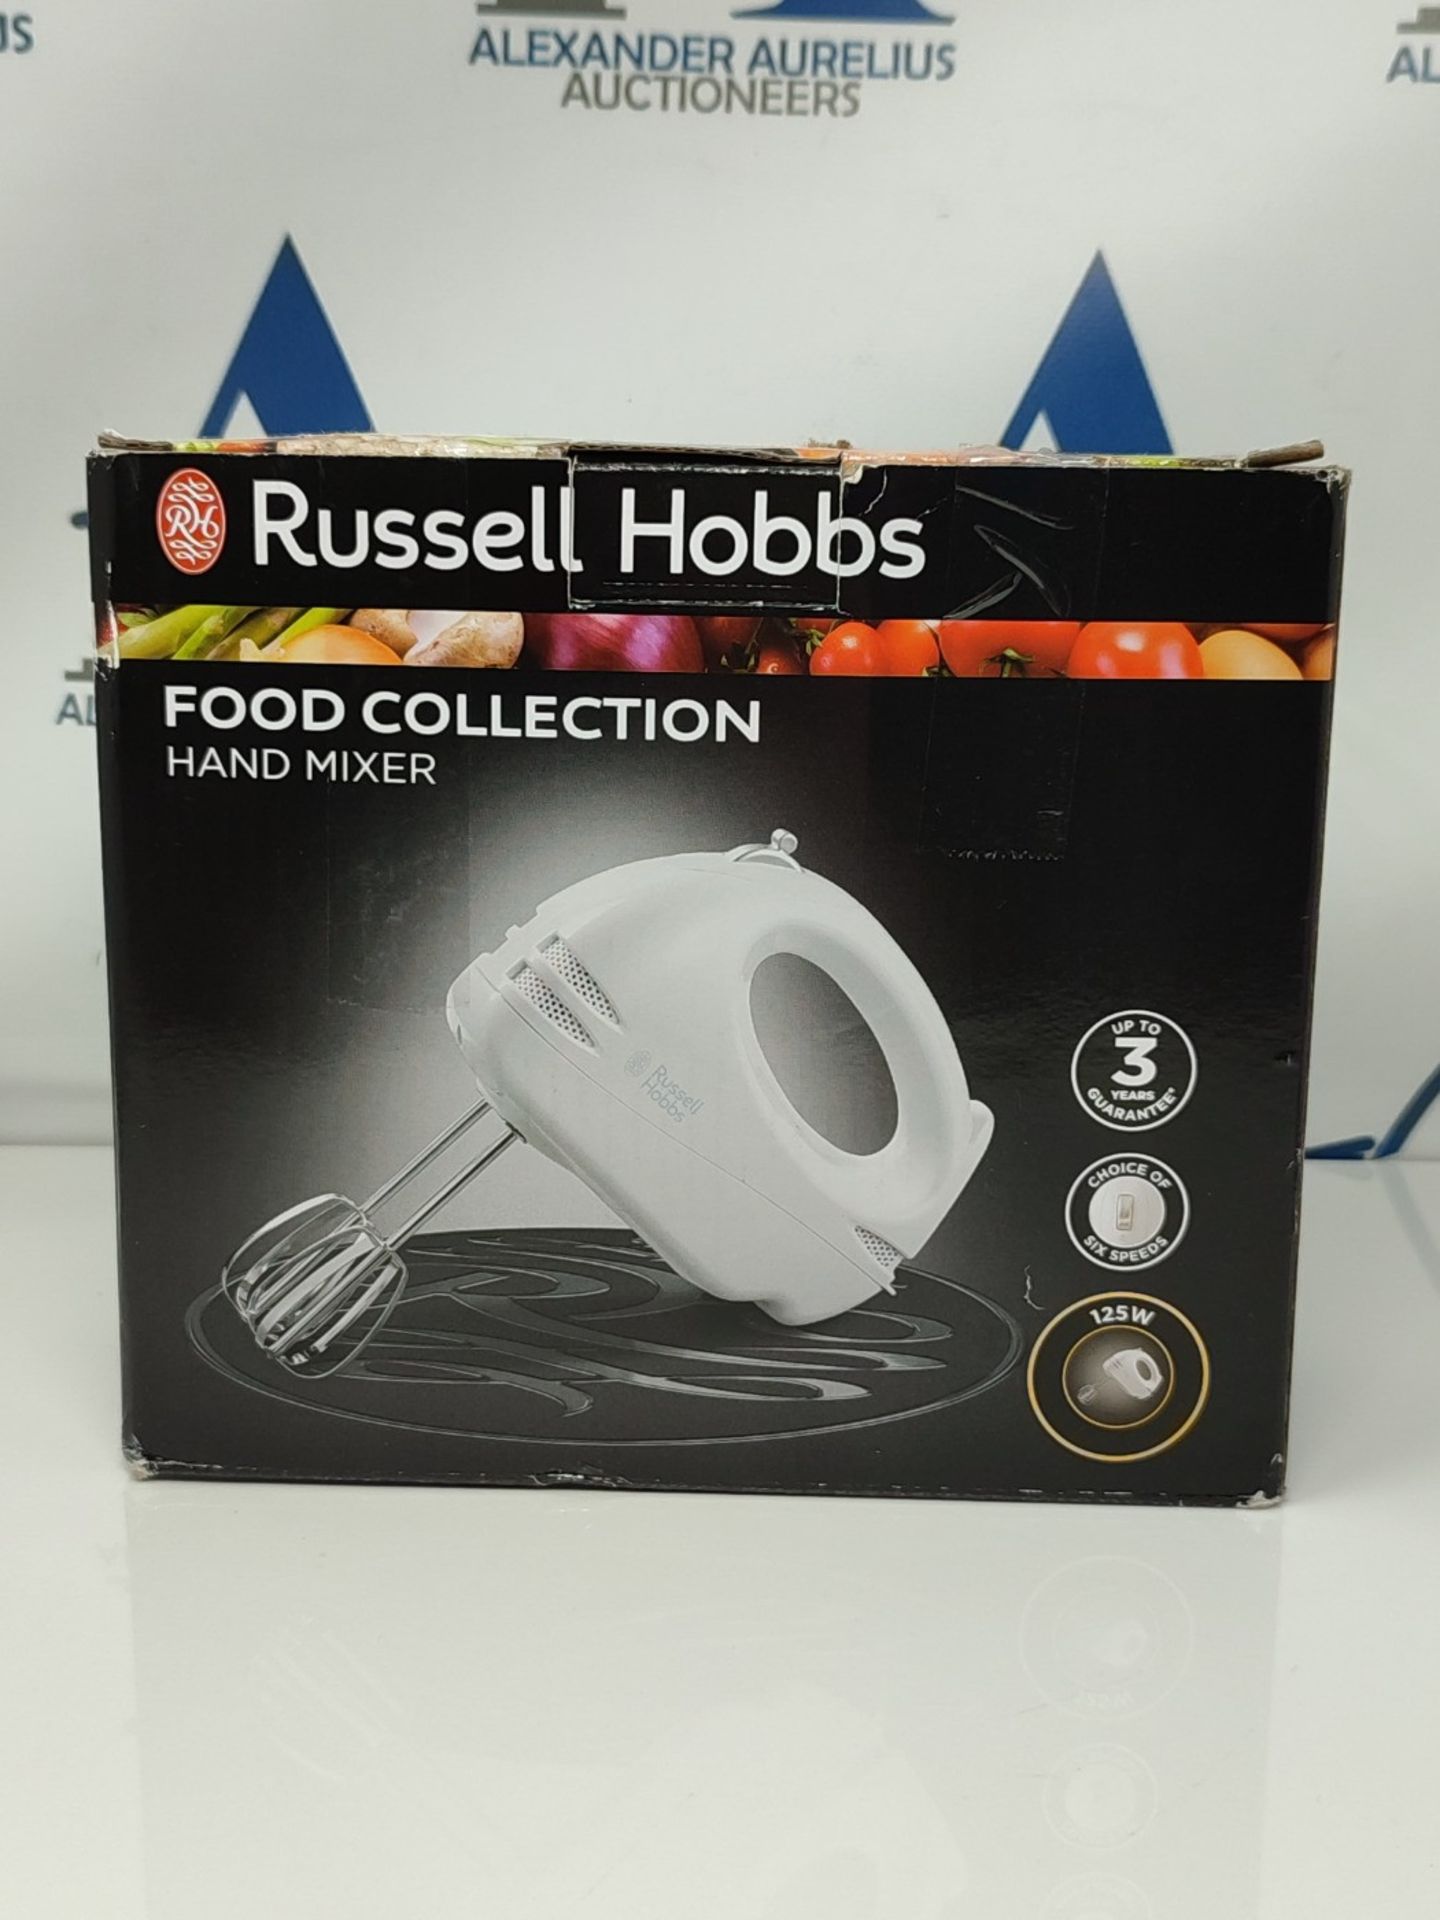 Russell Hobbs Food Collection Hand Mixer with 6 Speed 14451, 125 W - White - Bild 2 aus 3